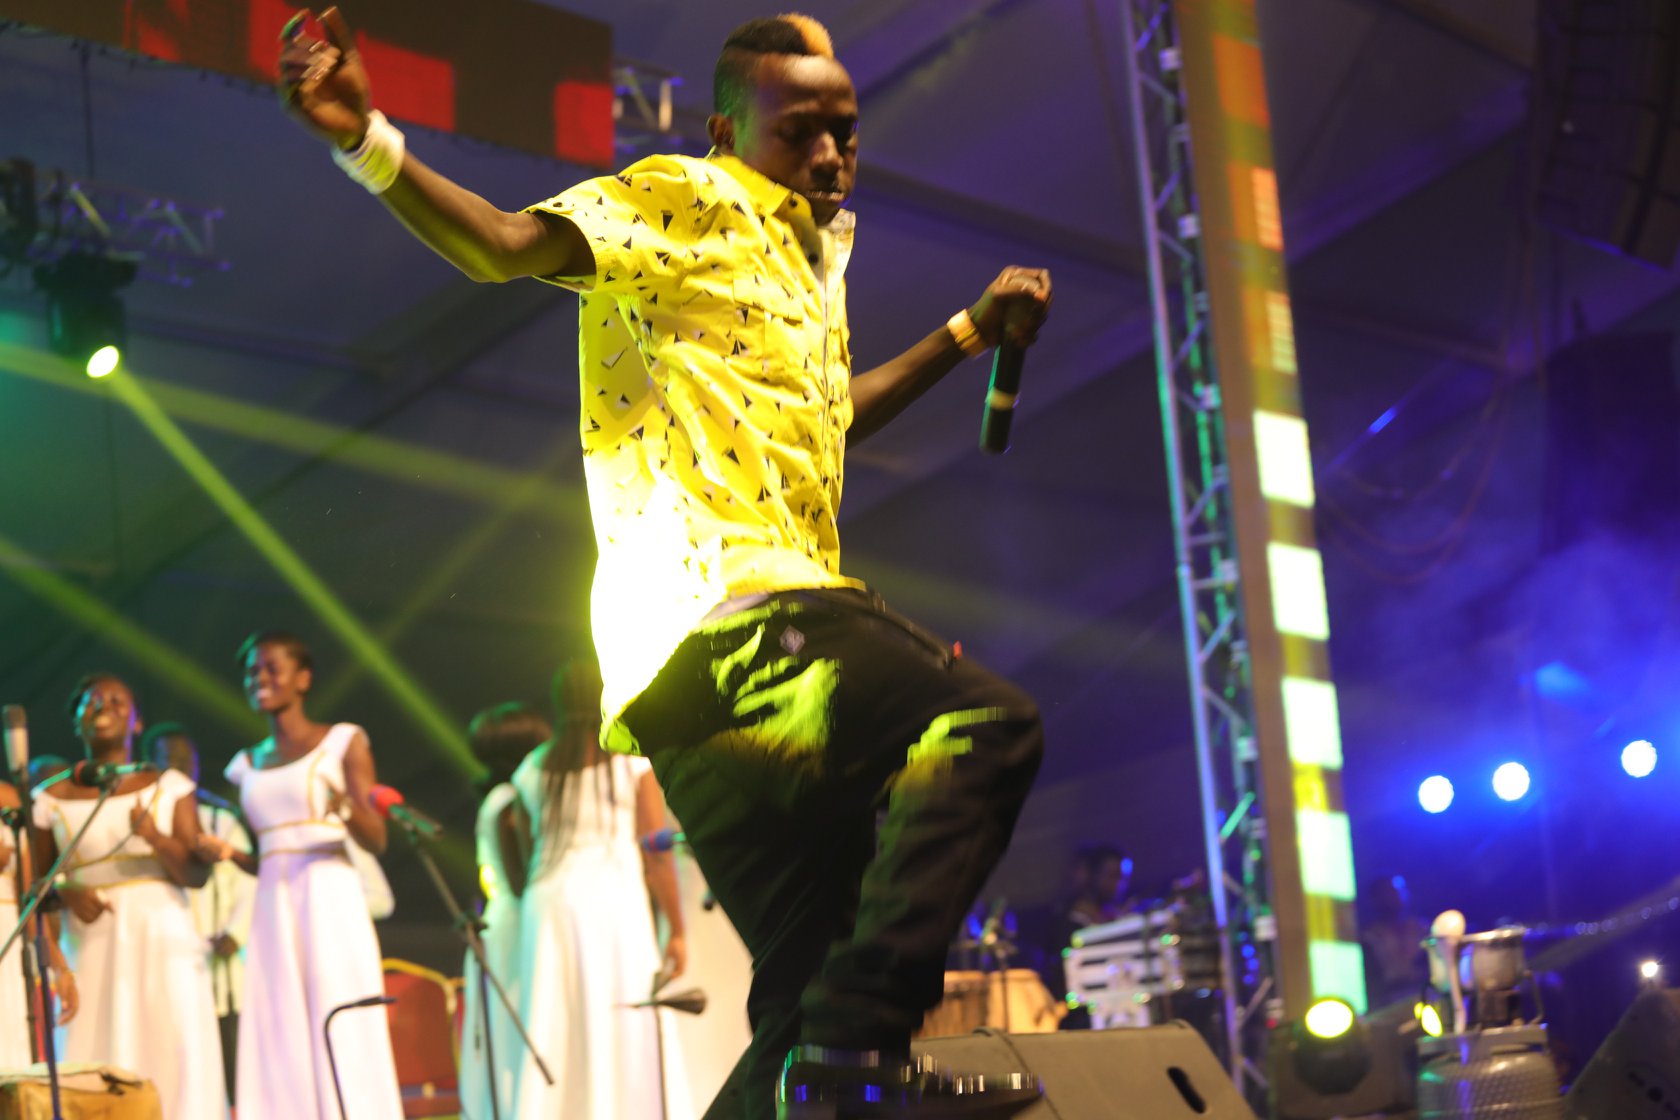 Patapaa leads the choir to sing his version of 'Jingle Bells'.